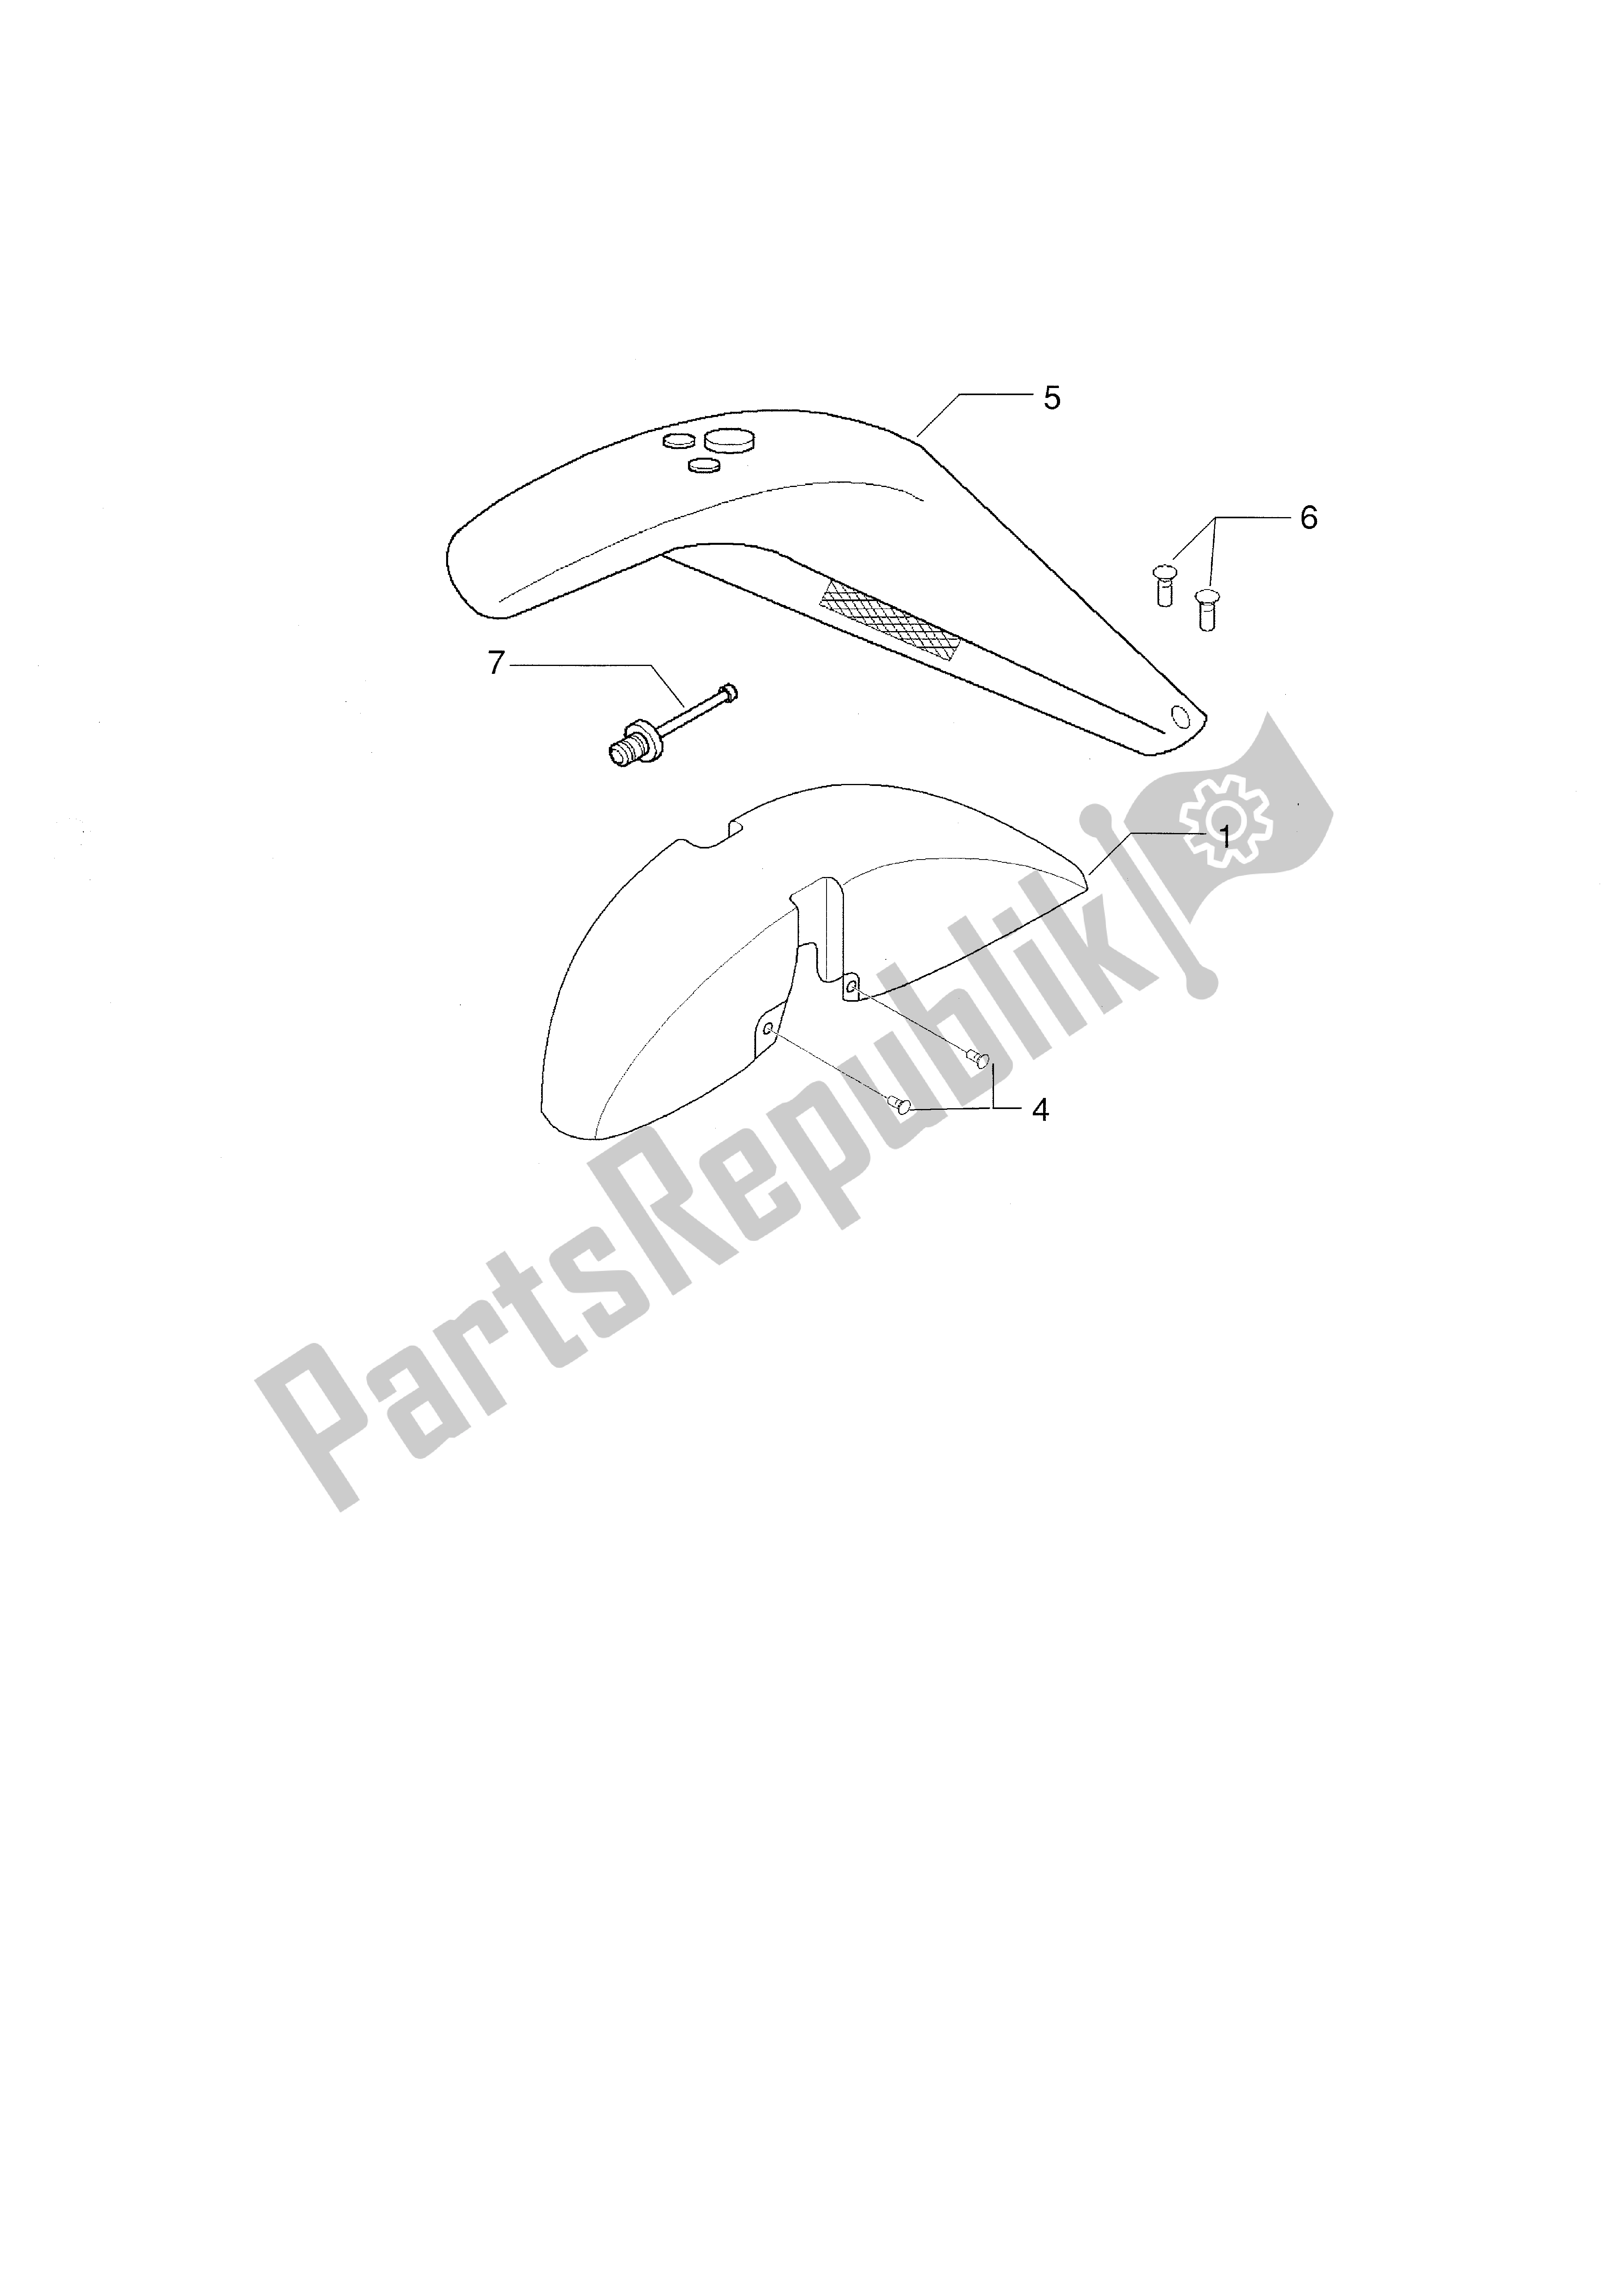 All parts for the Wheel Housing -mudguard of the Piaggio X9 500 2001 - 2002